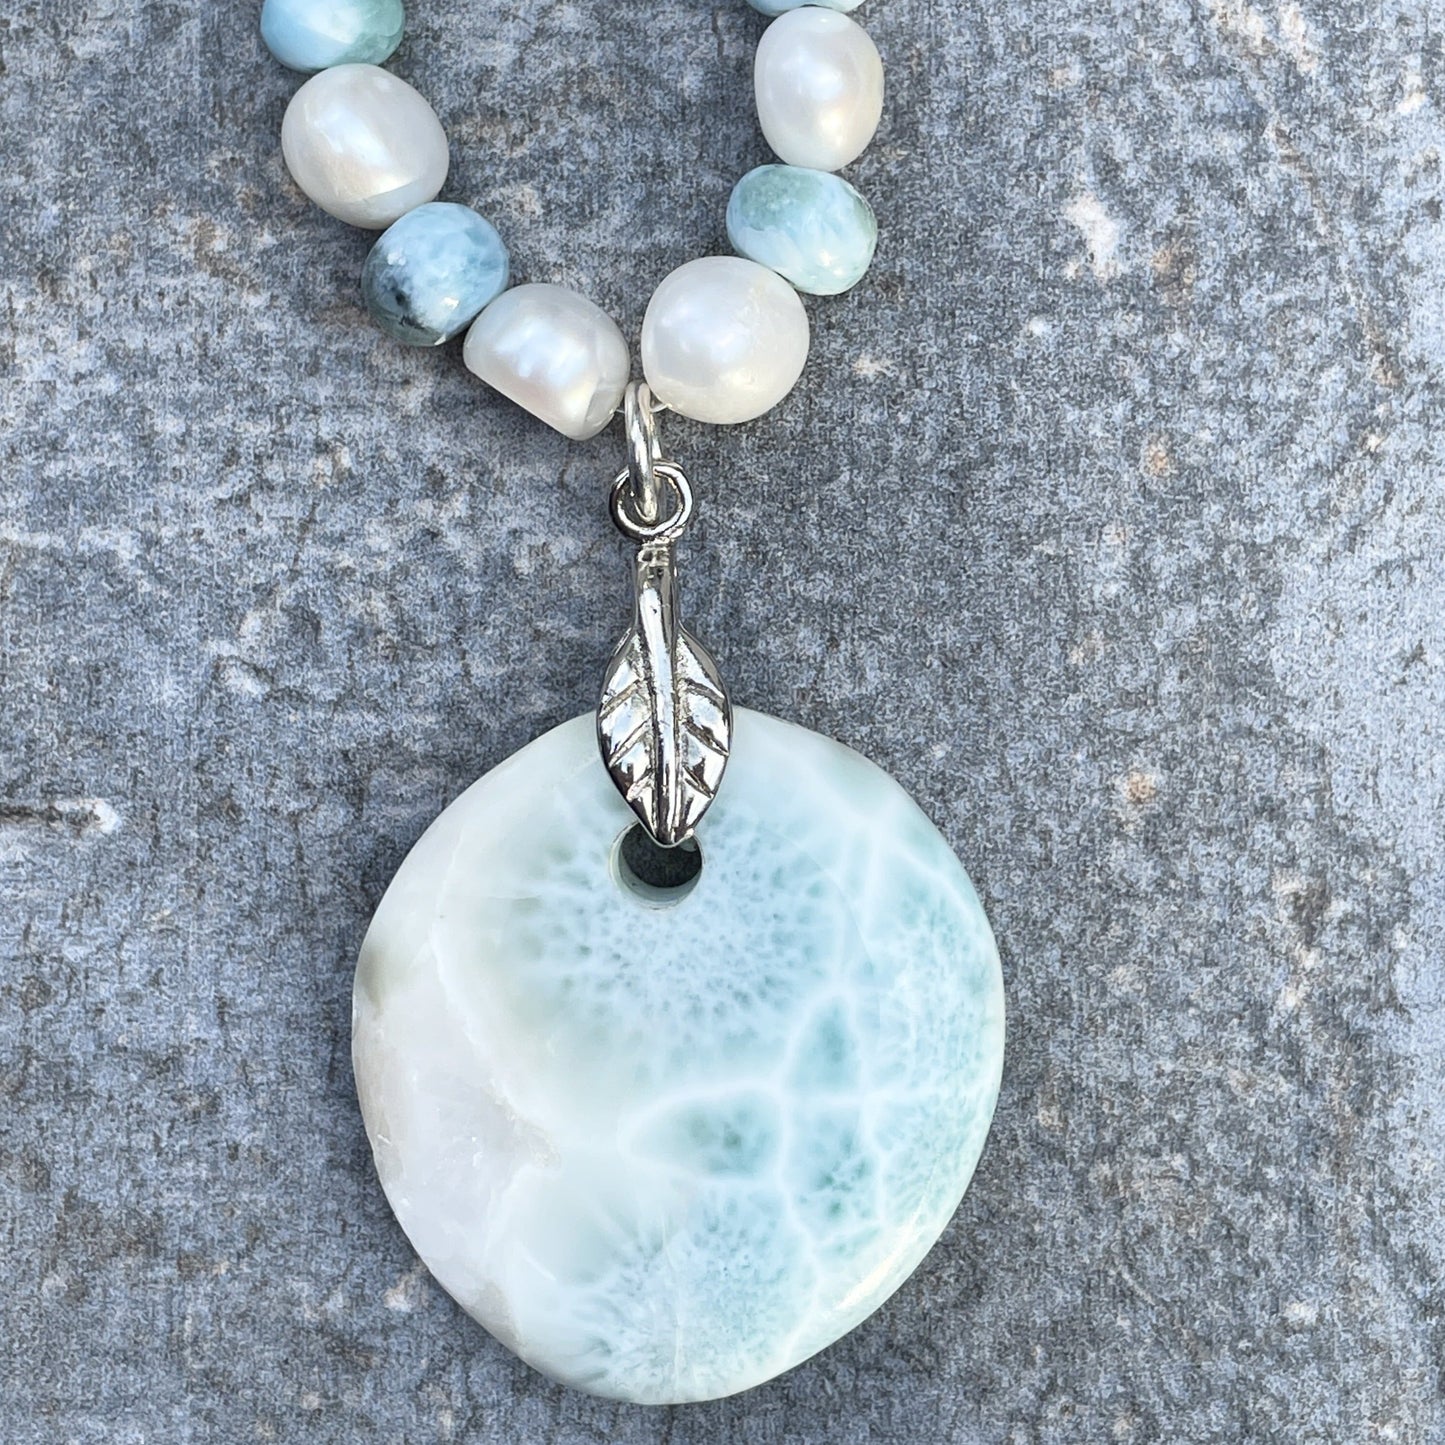 Larimar Pendant and Fresh Water Pearls Necklace